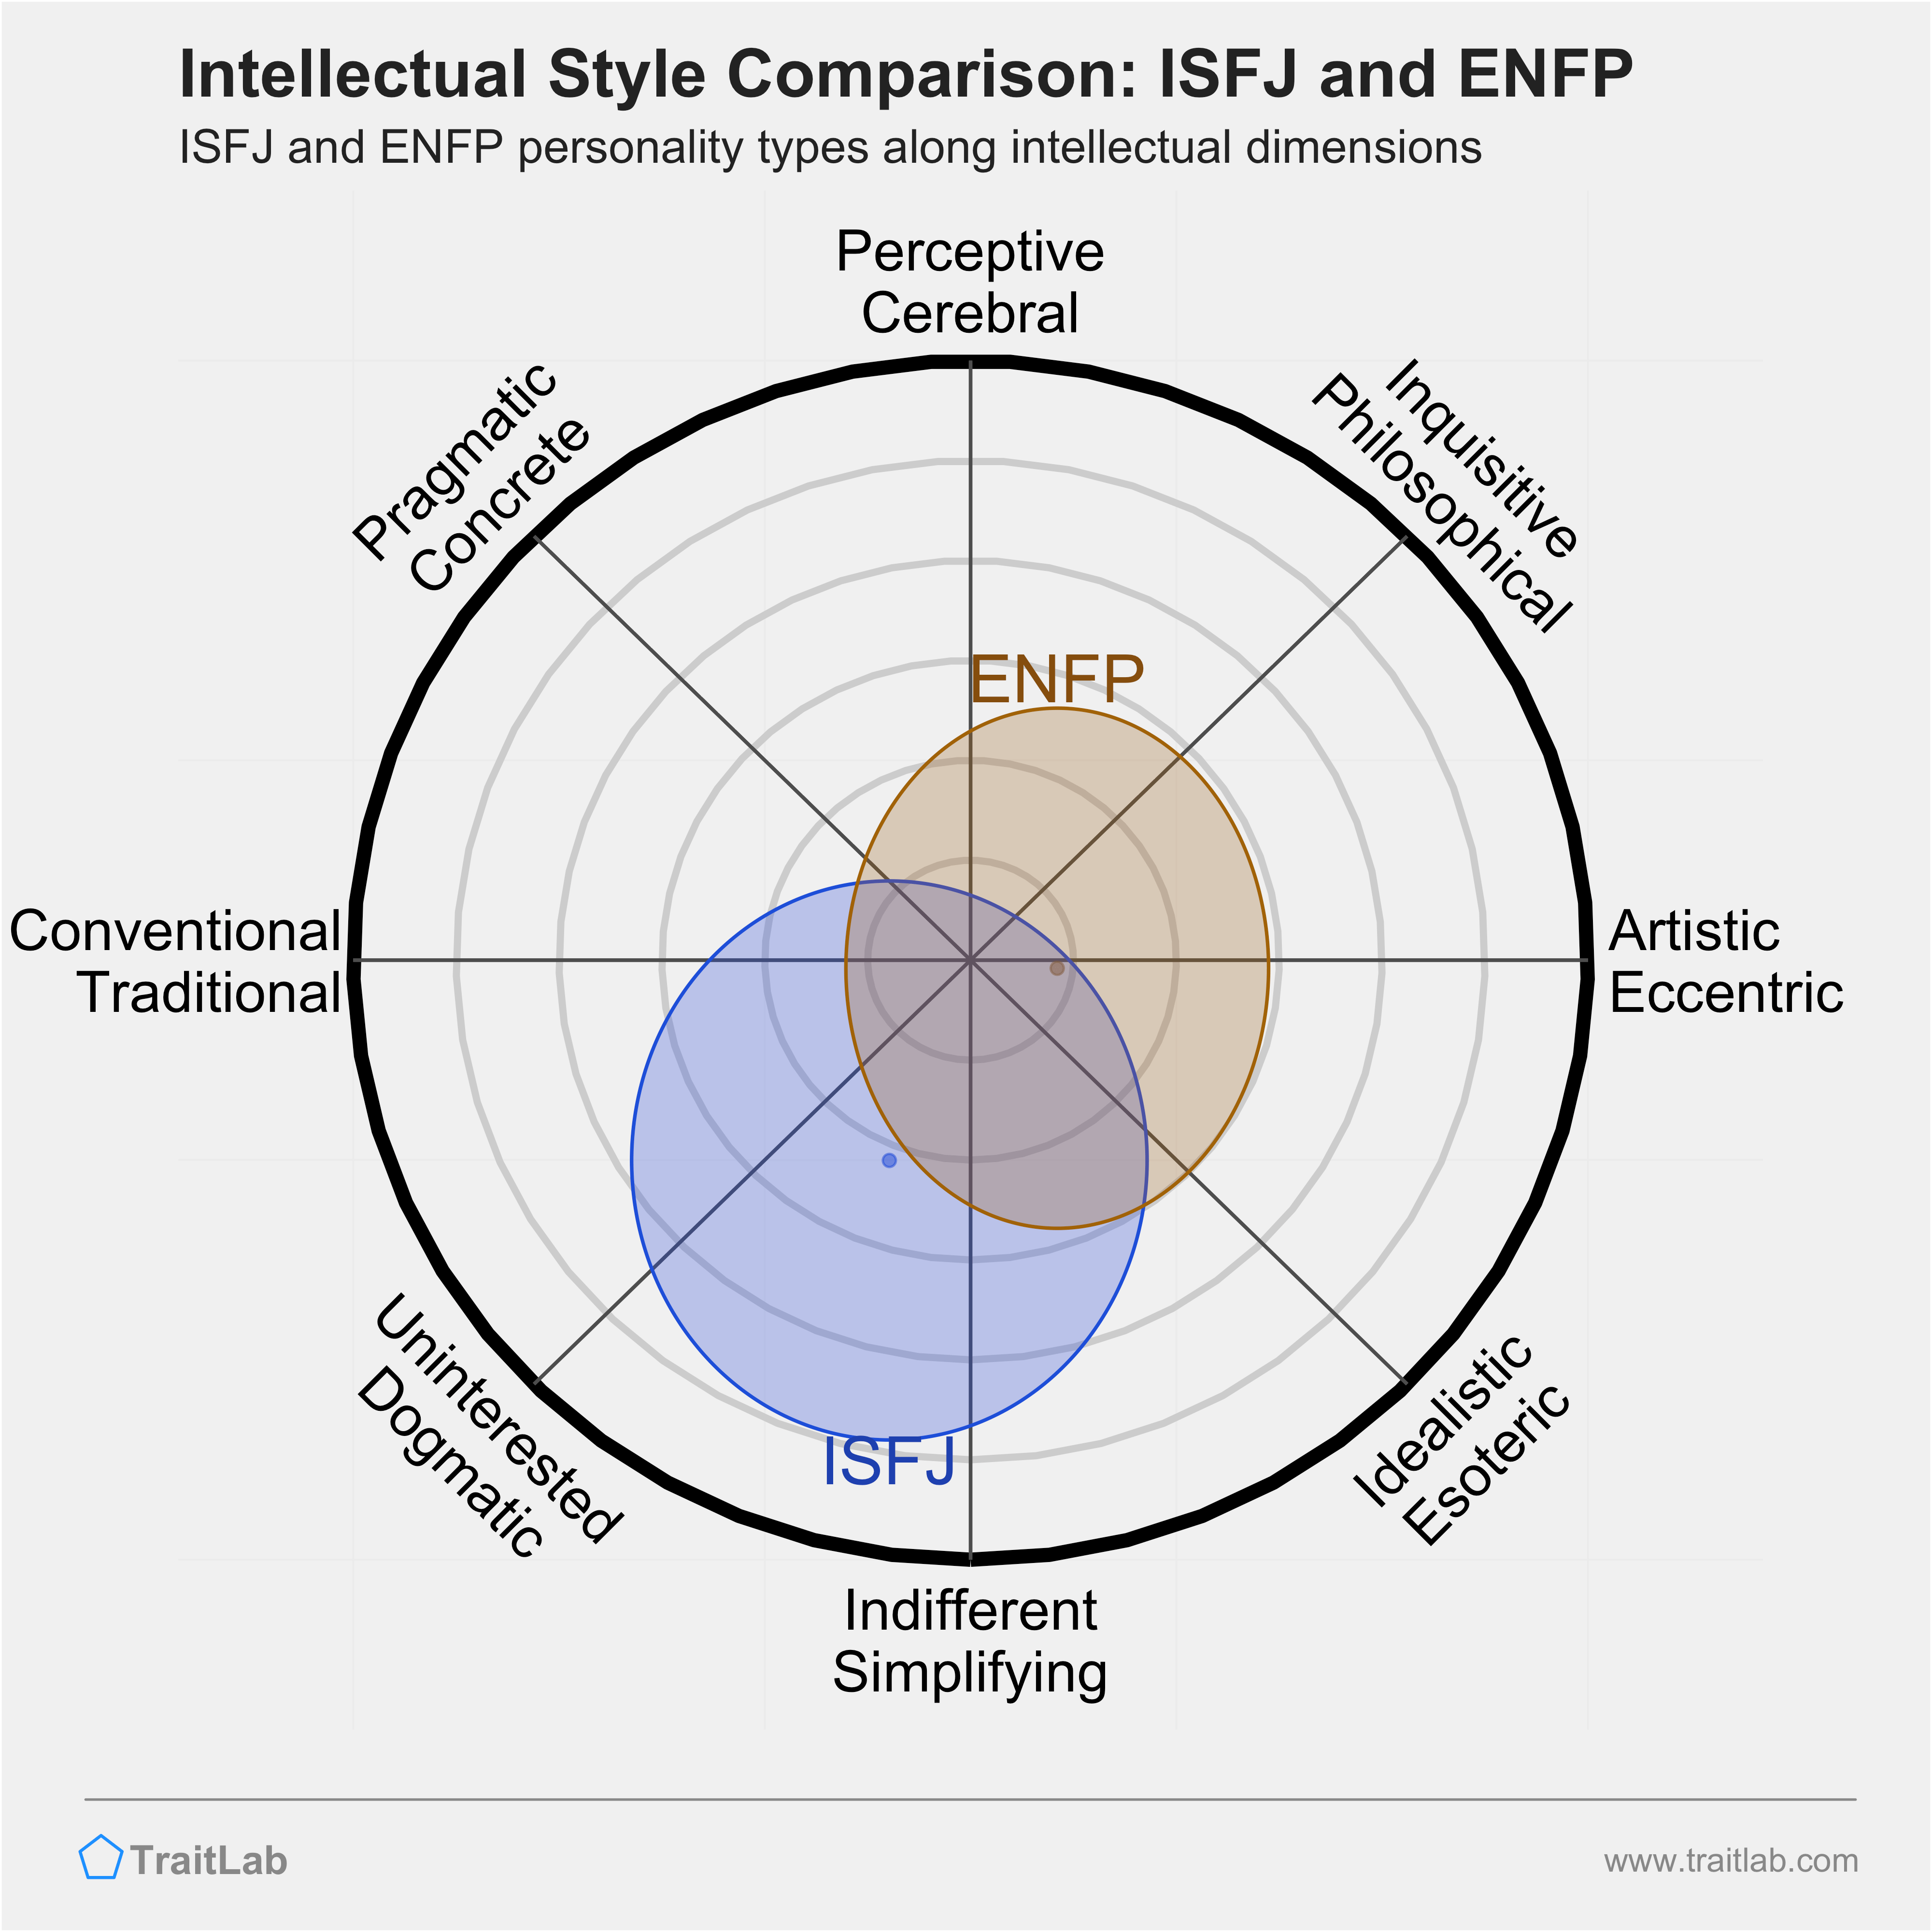 ISFJ and ENFP comparison across intellectual dimensions